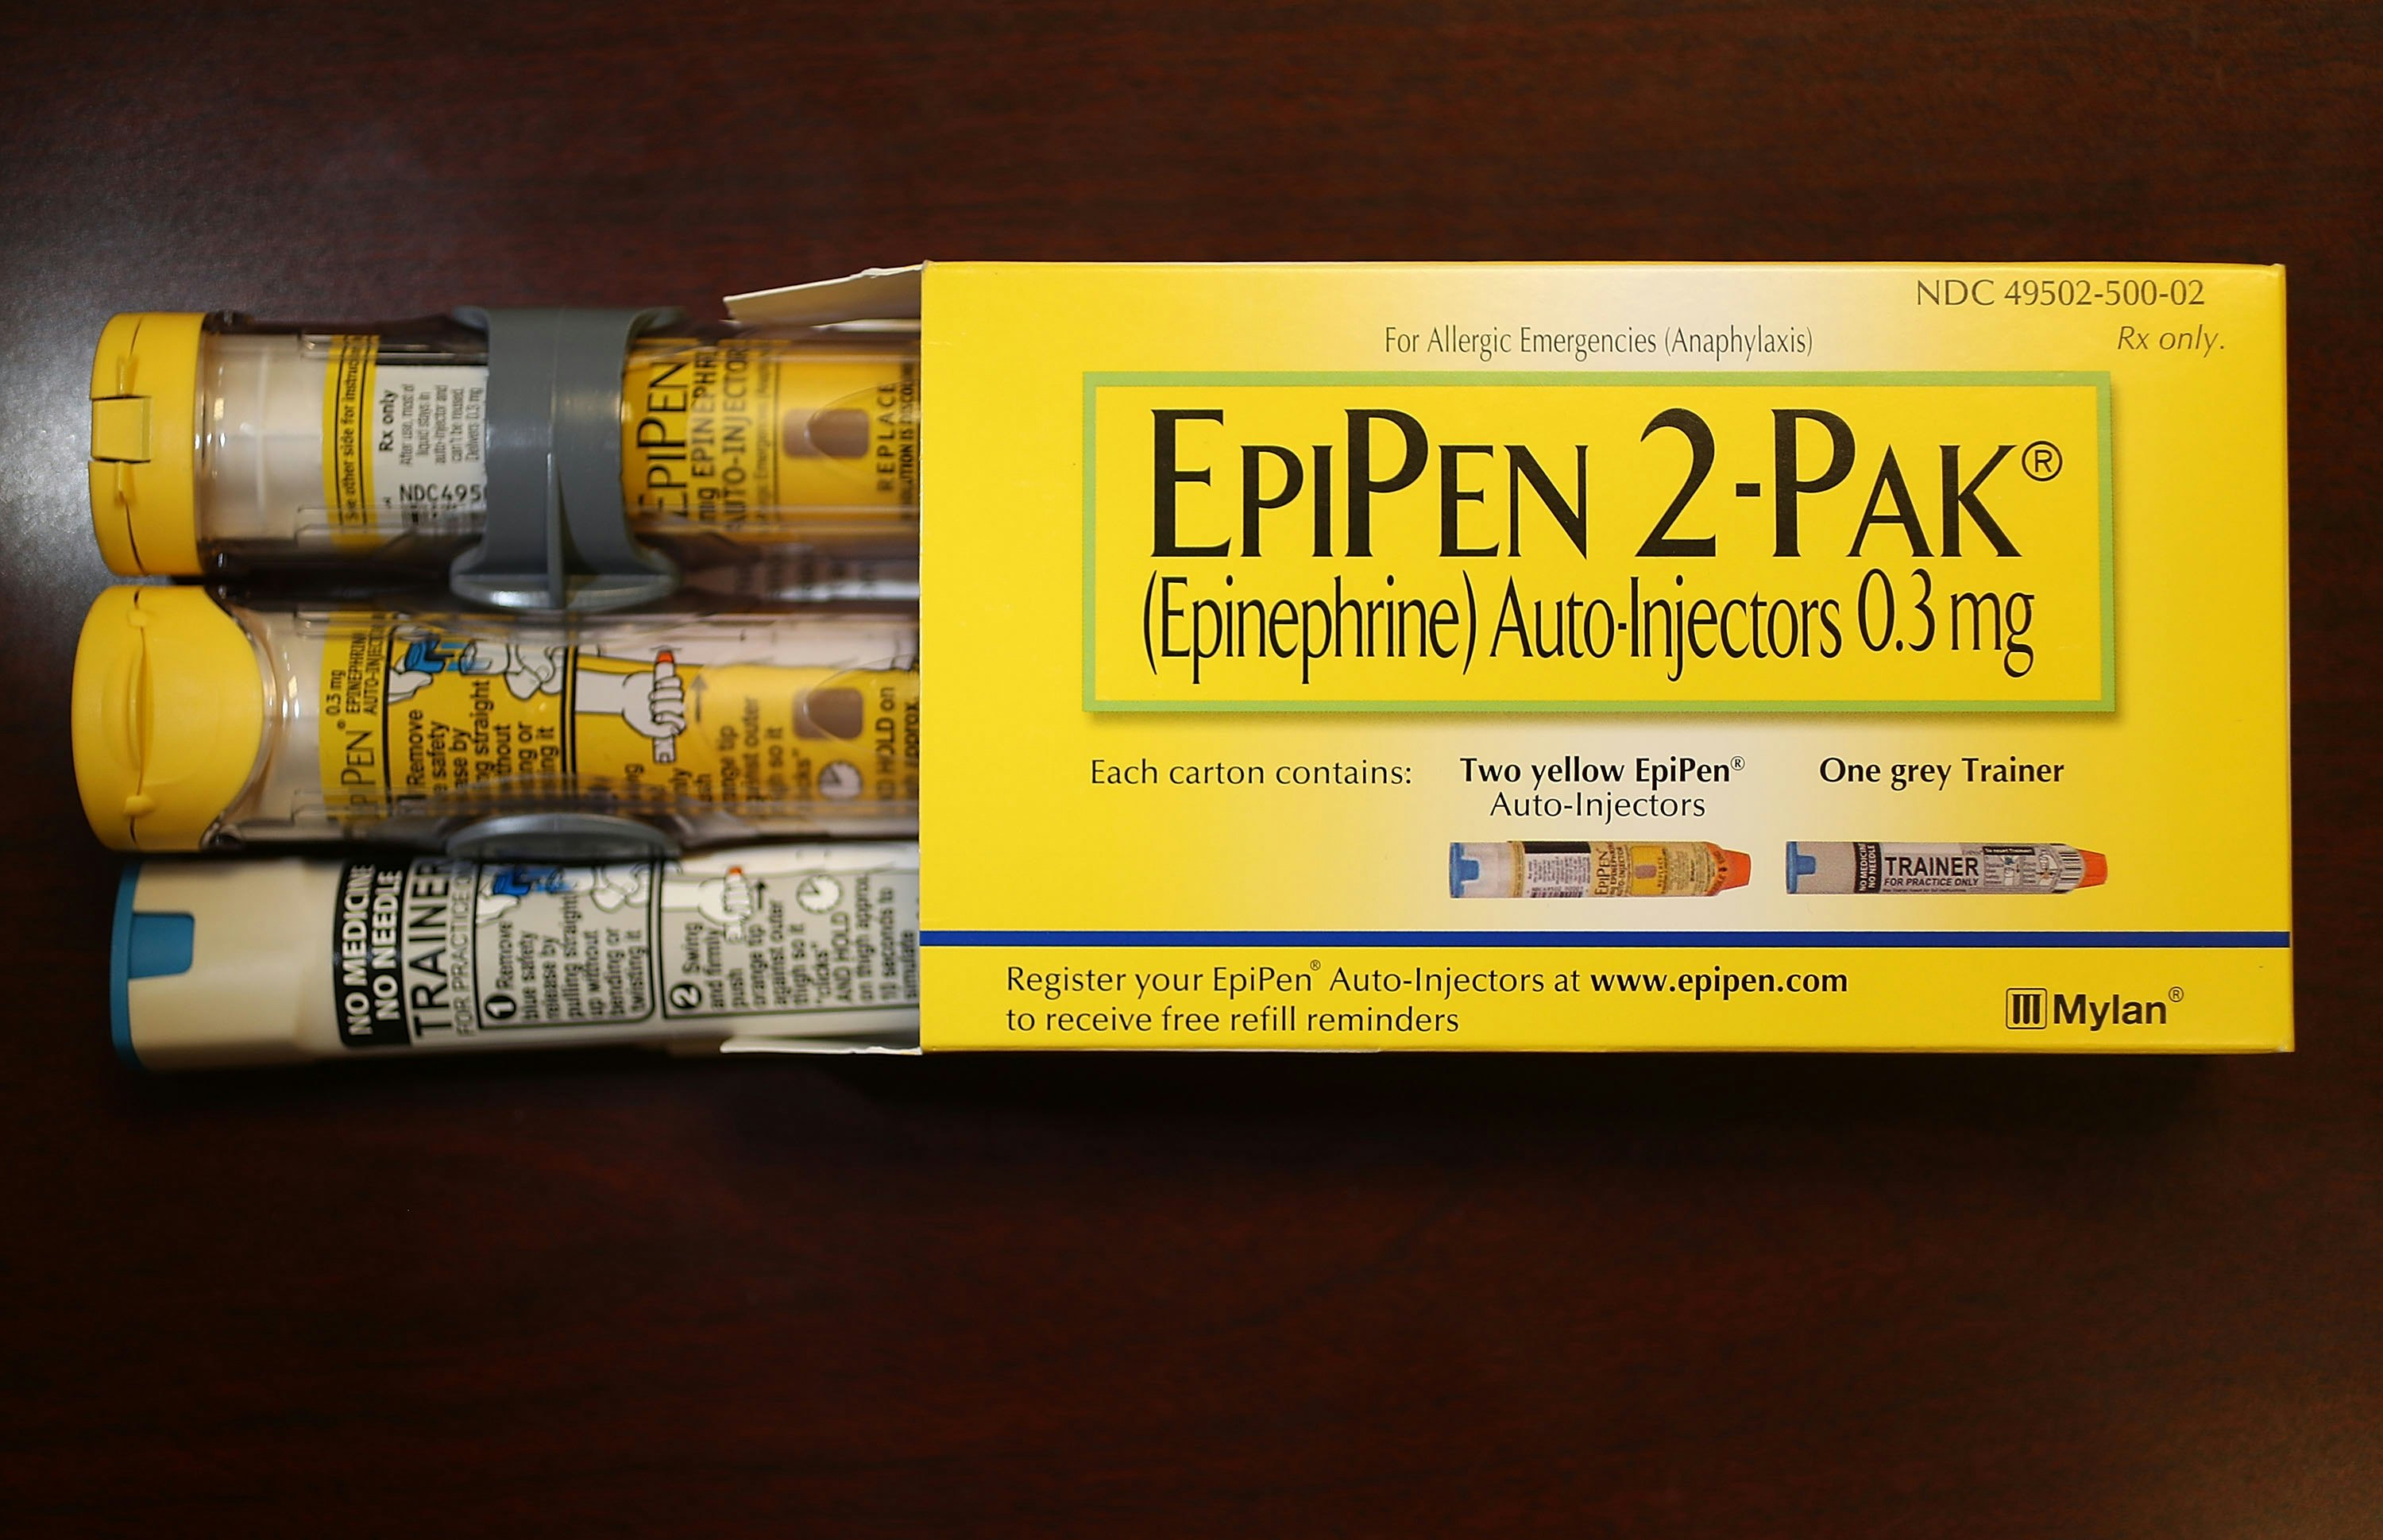 cvs will sell a generic epipen for cheaper   u0026 it u0026 39 s about time